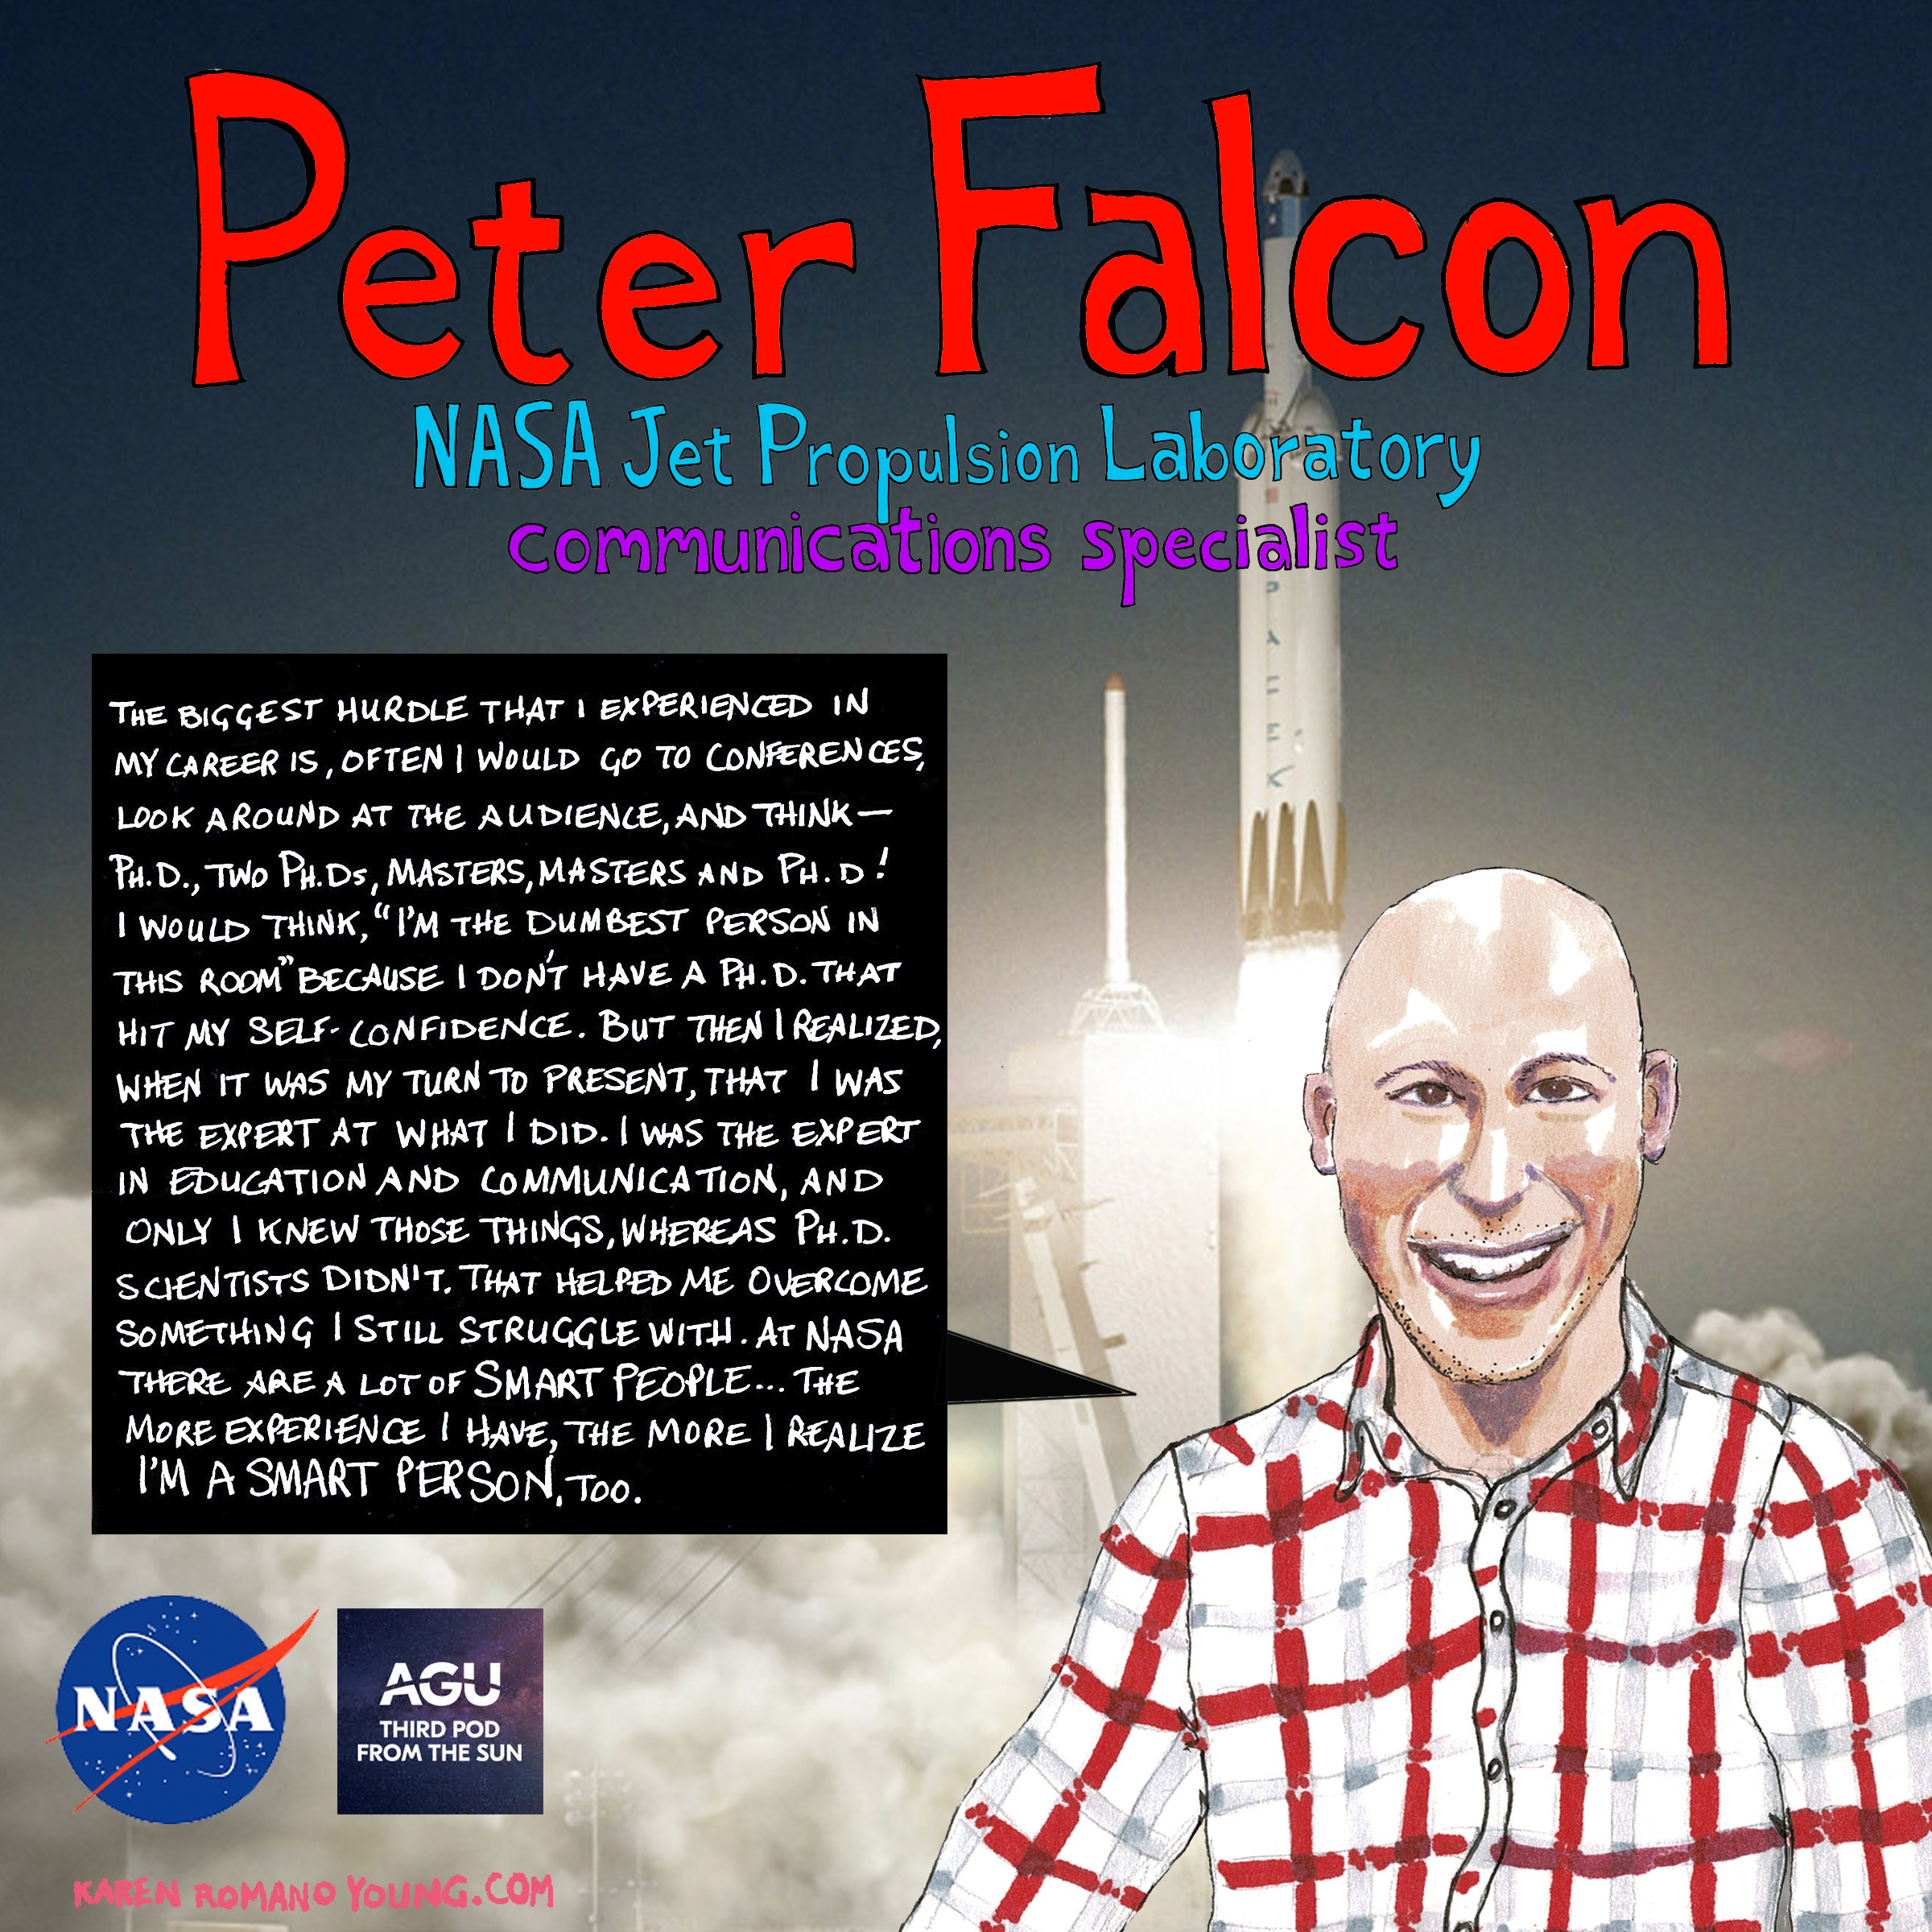 Drawing of Peter Falcon with a rocket launching in the background.